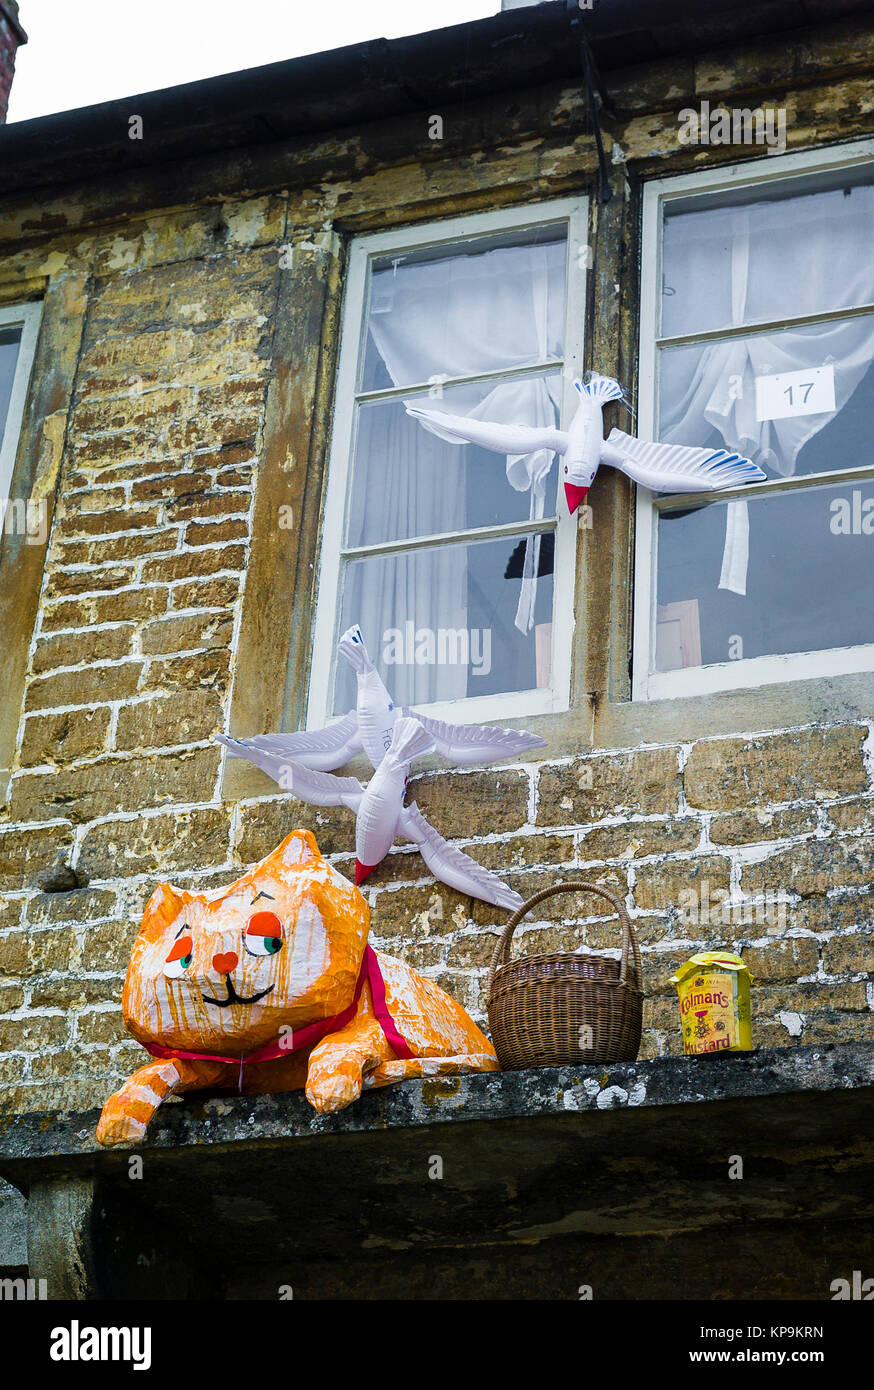 A scarecrow resembling Bagpuss, dreaming about catching birds, one of the entries in Lacock village annual competition in Wiltshire UK Stock Photo